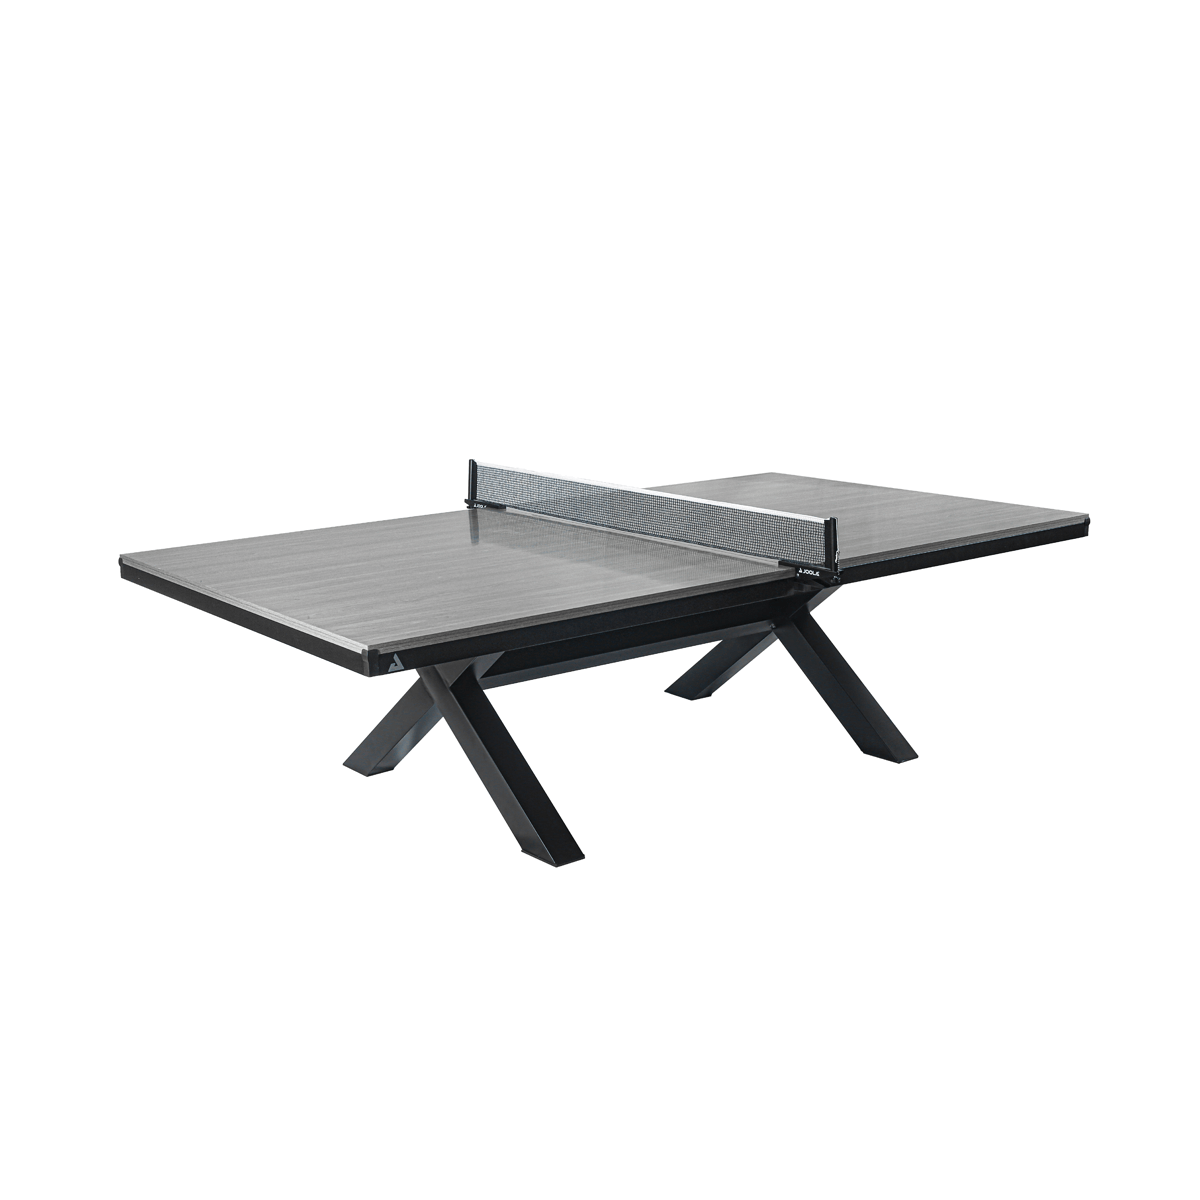 ping pong table background